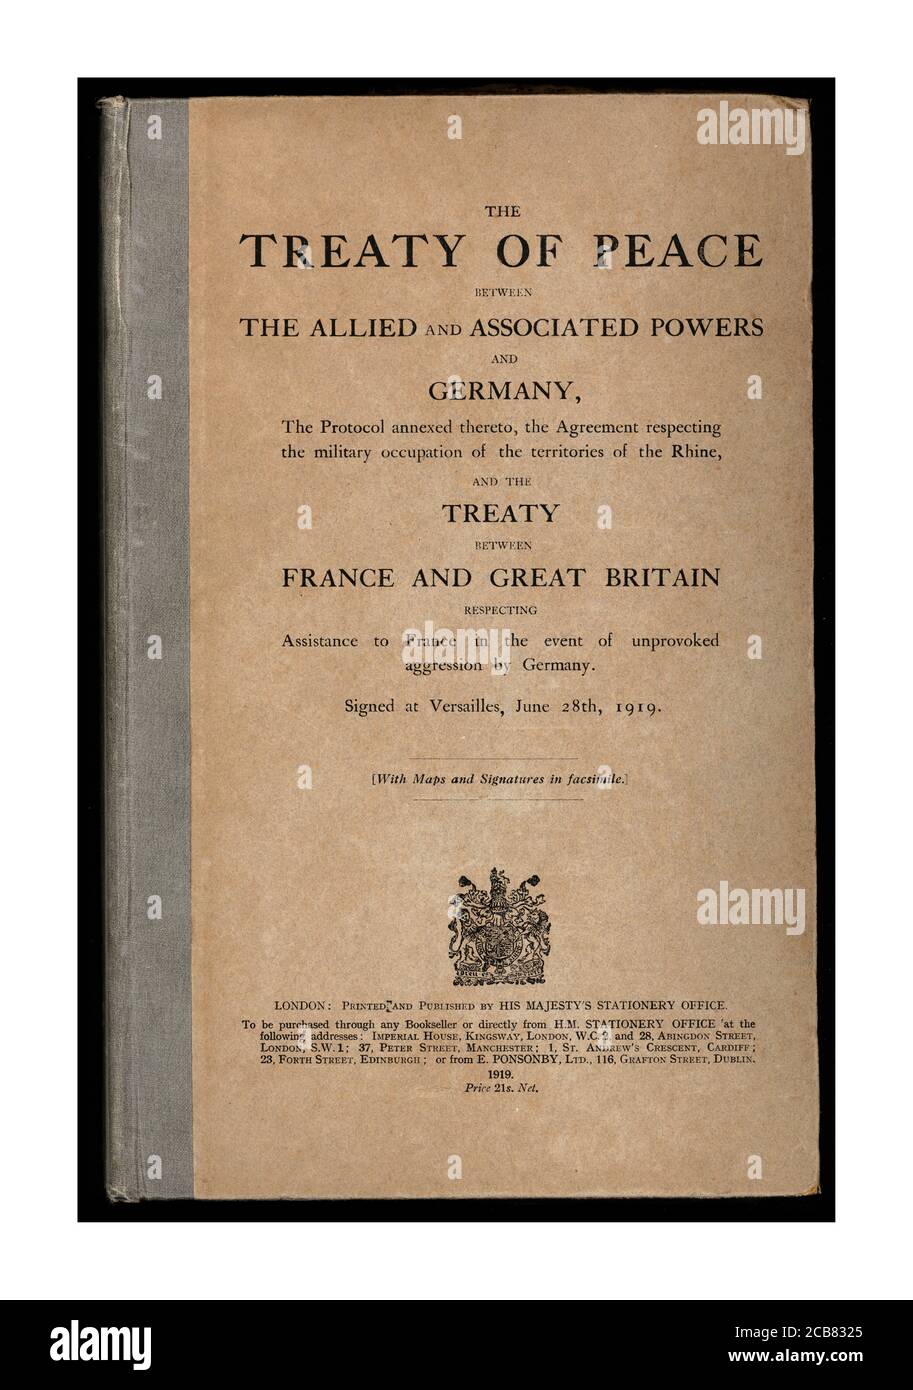 Archive WW1 Front Cover of Treaty of Versailles, English version 1919 The End of World War 1 WW1 First World War The Treaty of Versailles  was the most important of the peace treaties that brought World War I to an end. The Treaty ended the state of war between Germany and the Allied Powers. It was signed on 28 June 1919 in Versailles, exactly five years after the assassination of Archduke Franz Ferdinand, which had directly led to the war Stock Photo